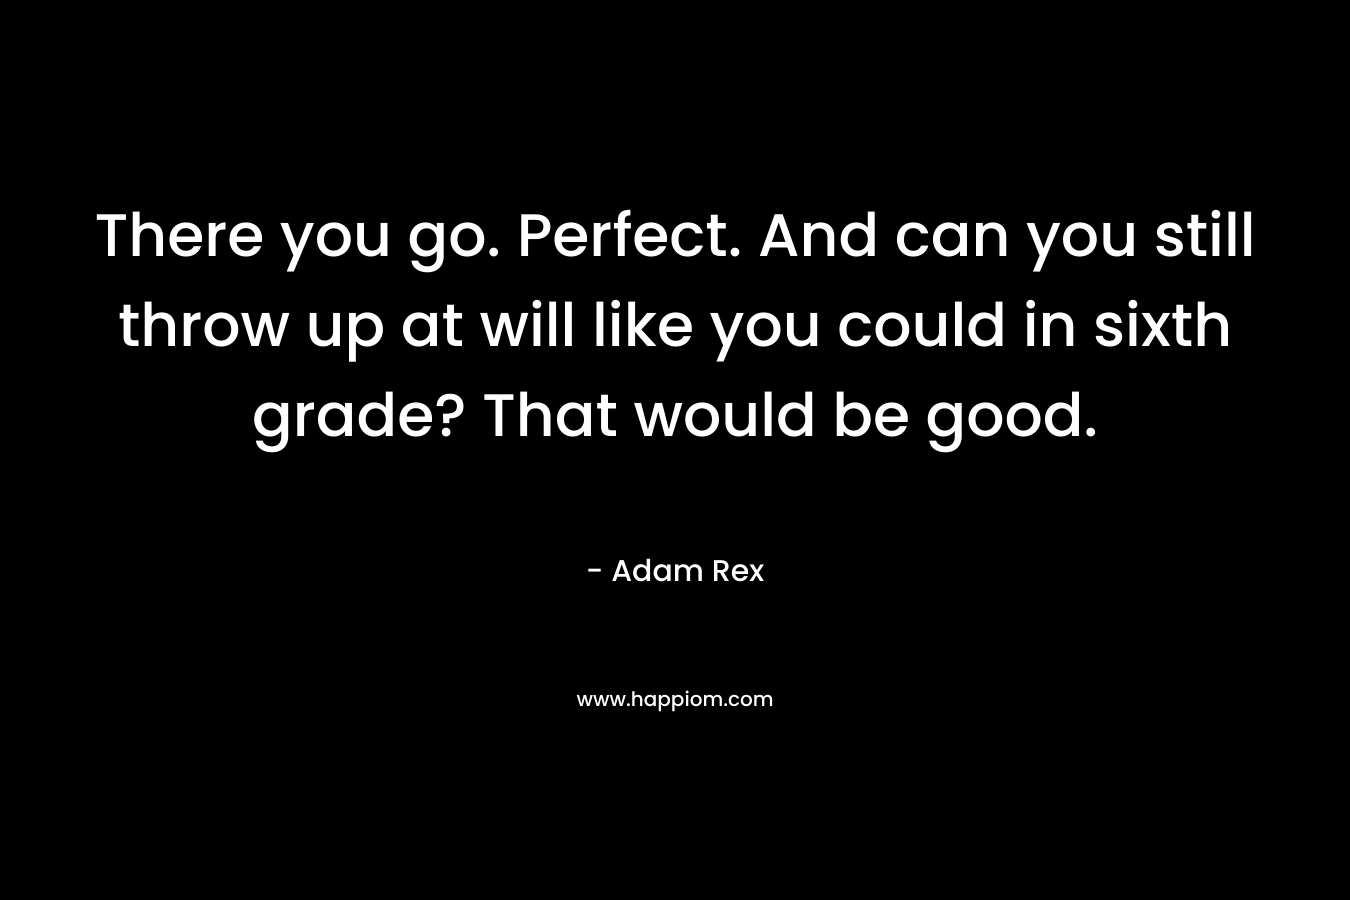 There you go. Perfect. And can you still throw up at will like you could in sixth grade? That would be good. – Adam Rex